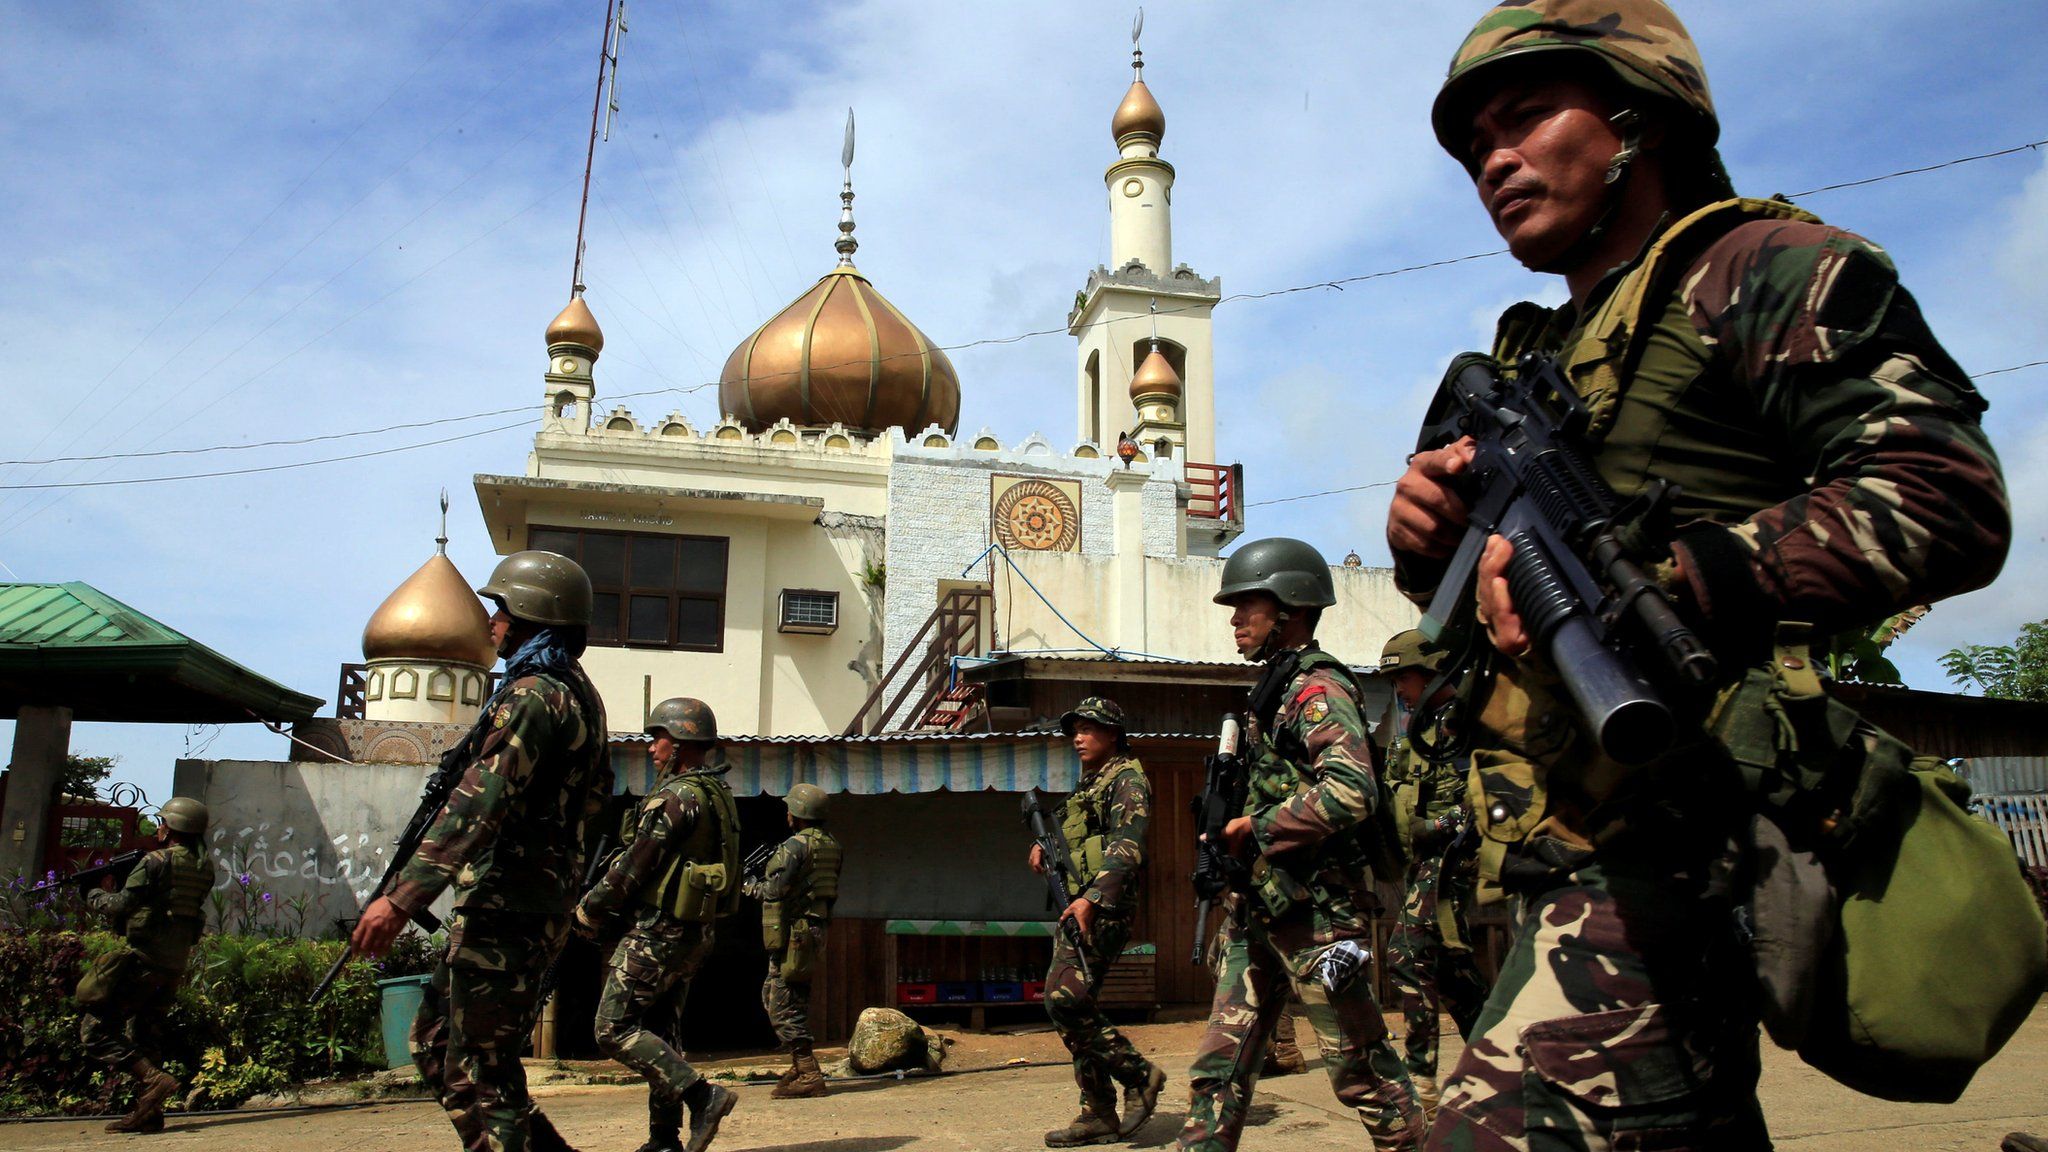 Government troops walk past a mosque before their assault with insurgents from the so-called Maute group, who have taken over large parts of Marawi City, southern Philippines 25 May 2017